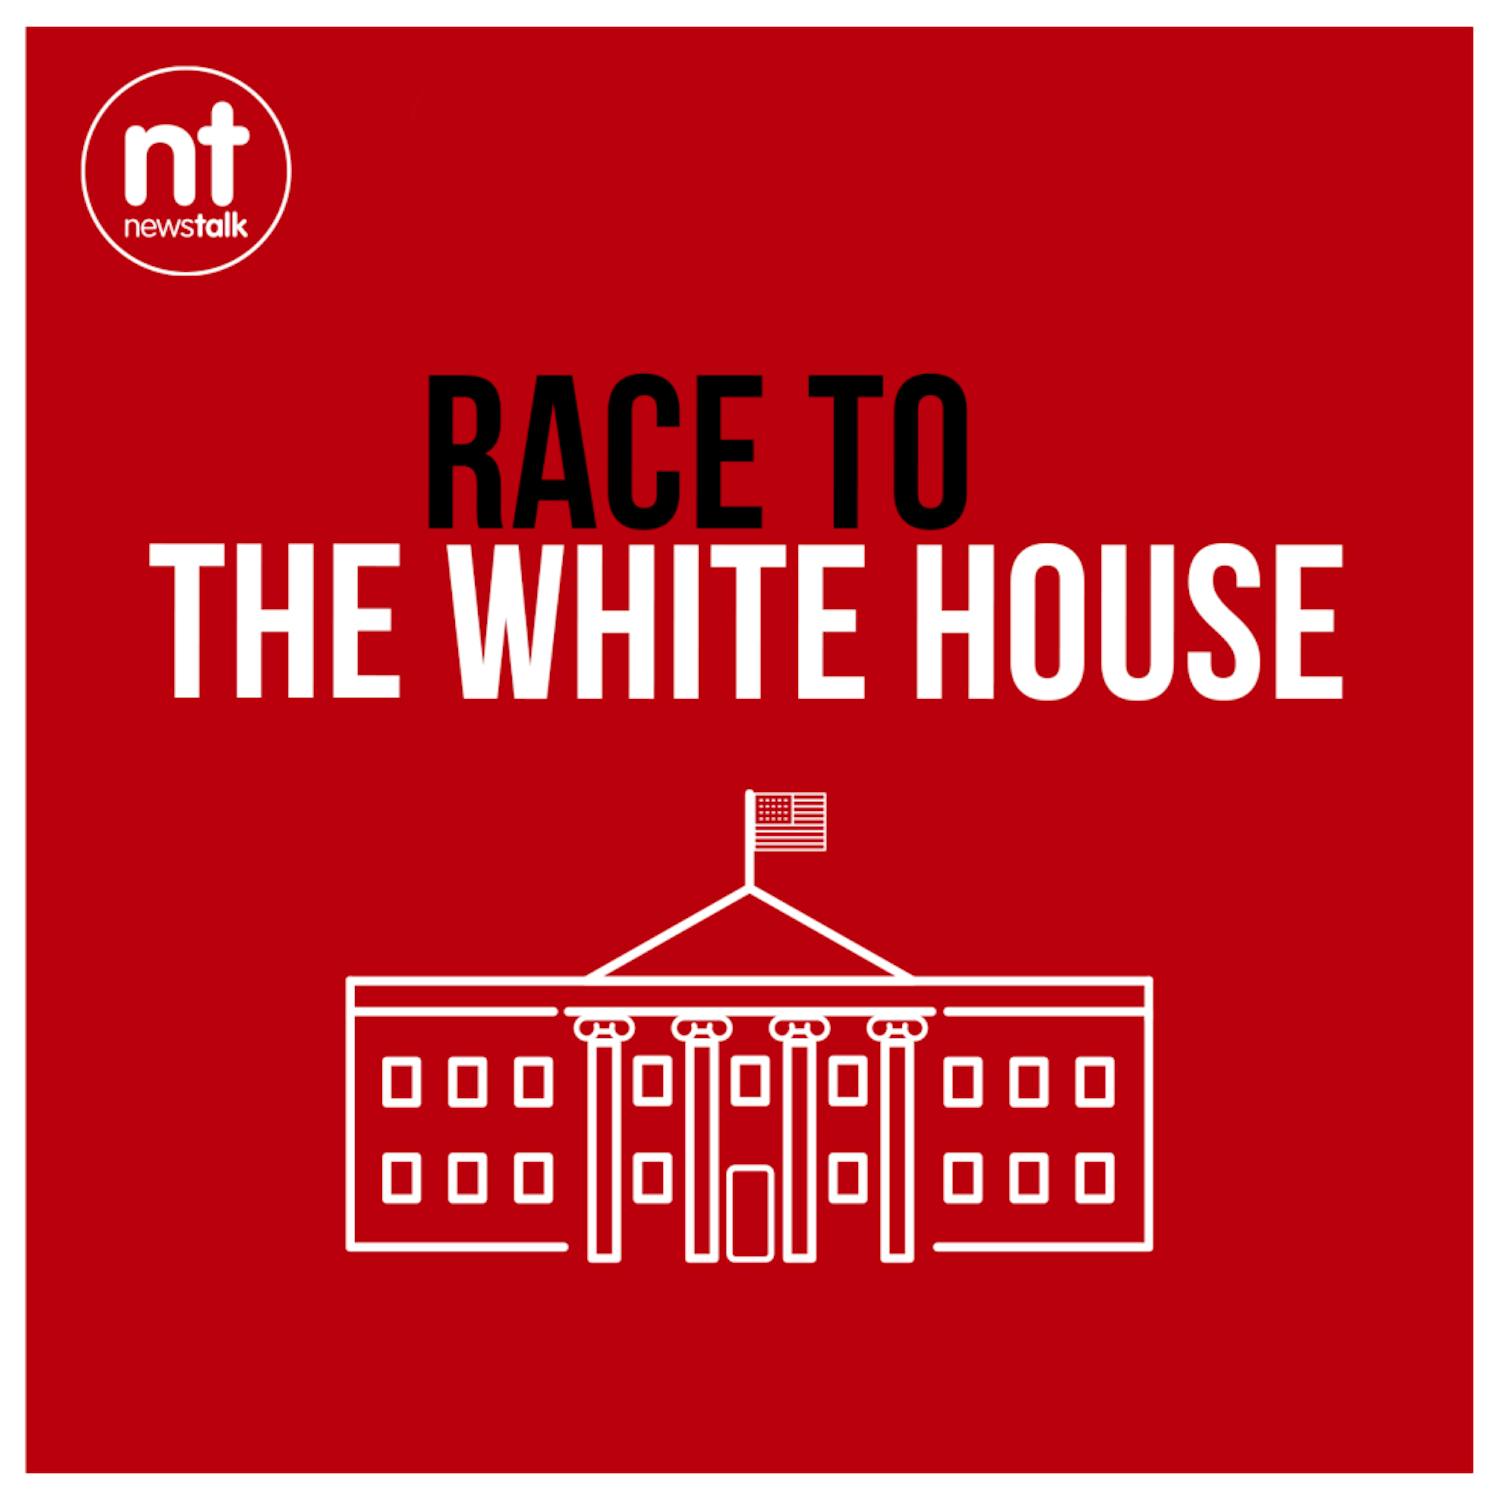 Coming soon: Race to the White House